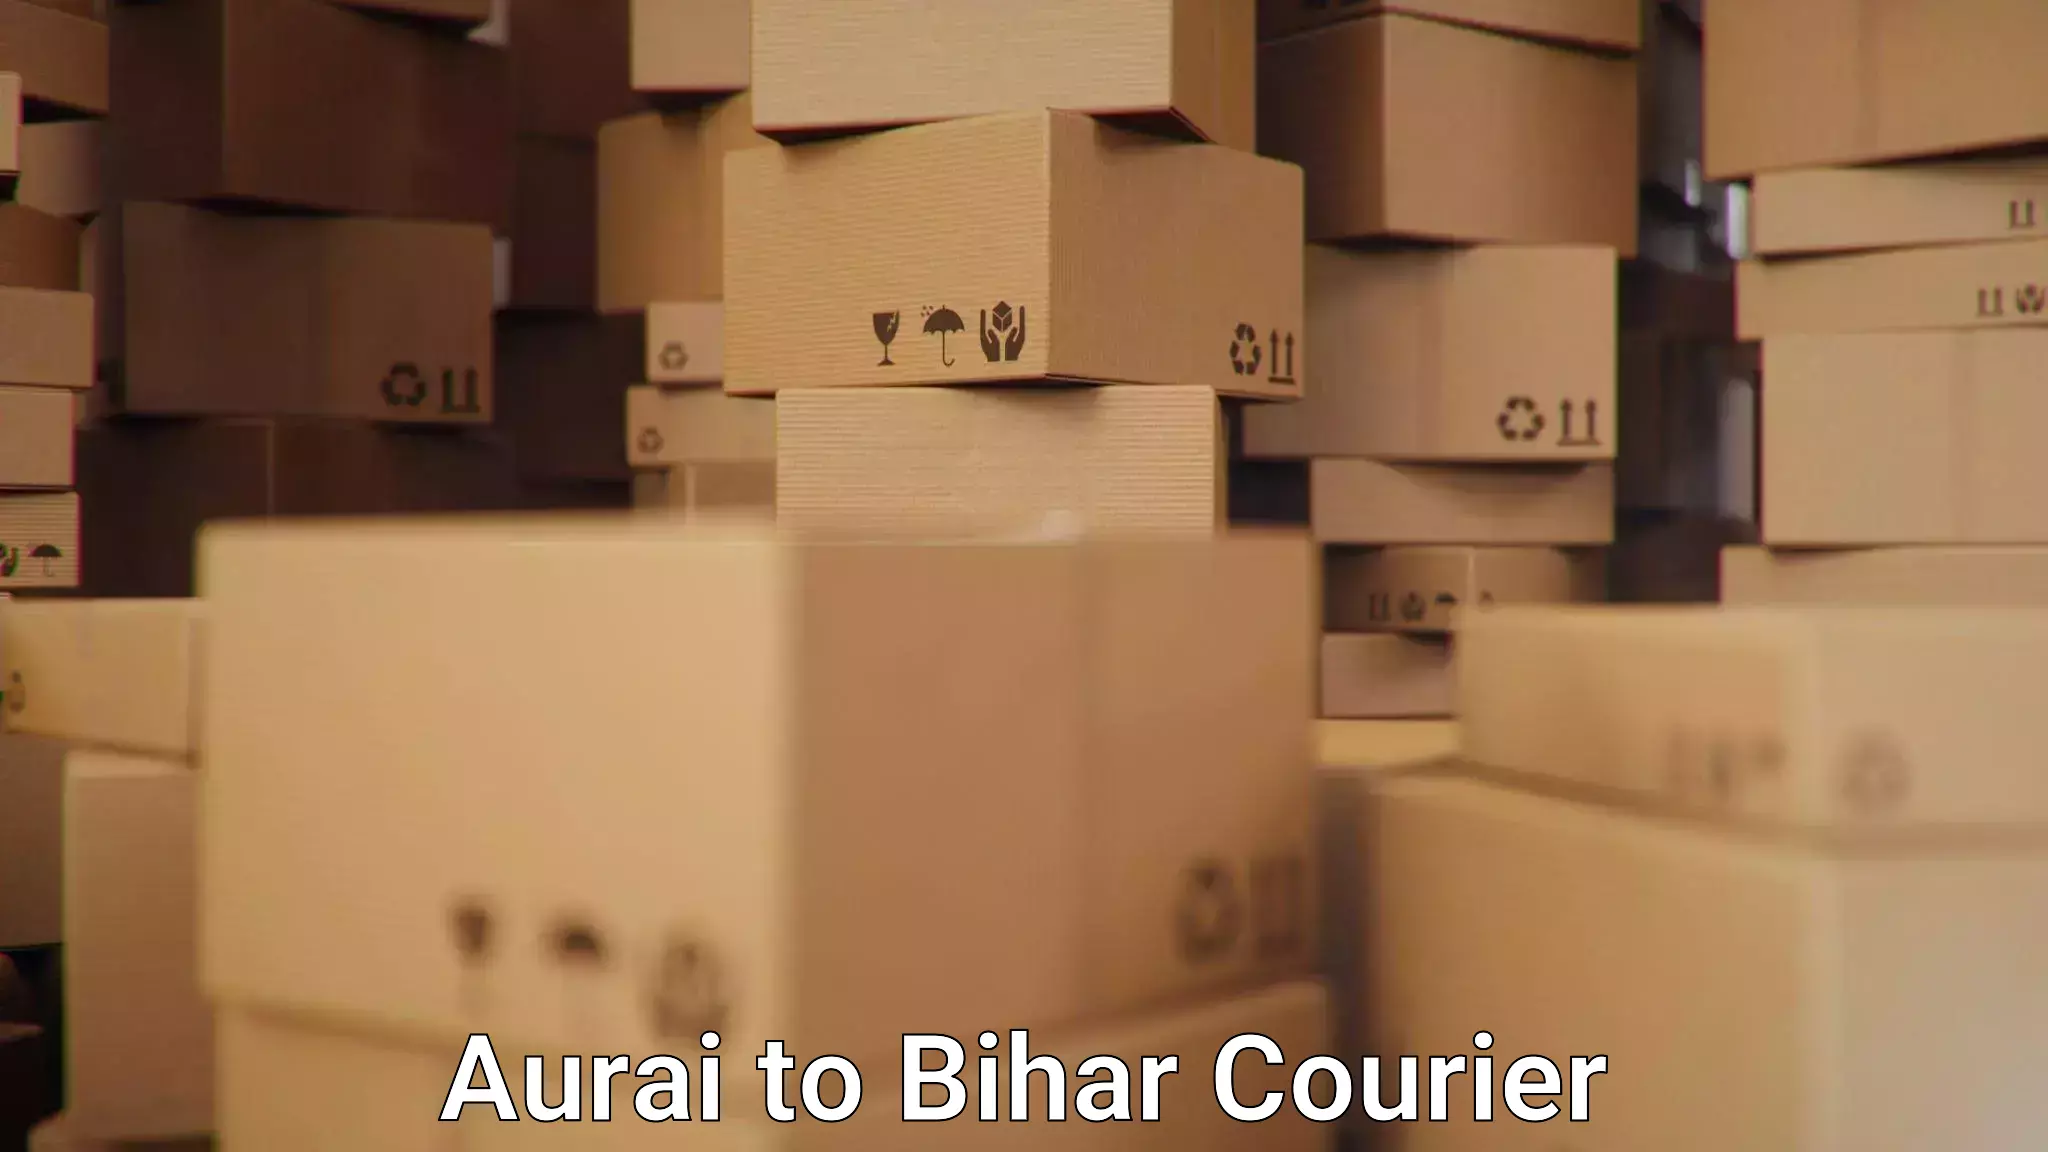 Enhanced delivery experience Aurai to Sheonar